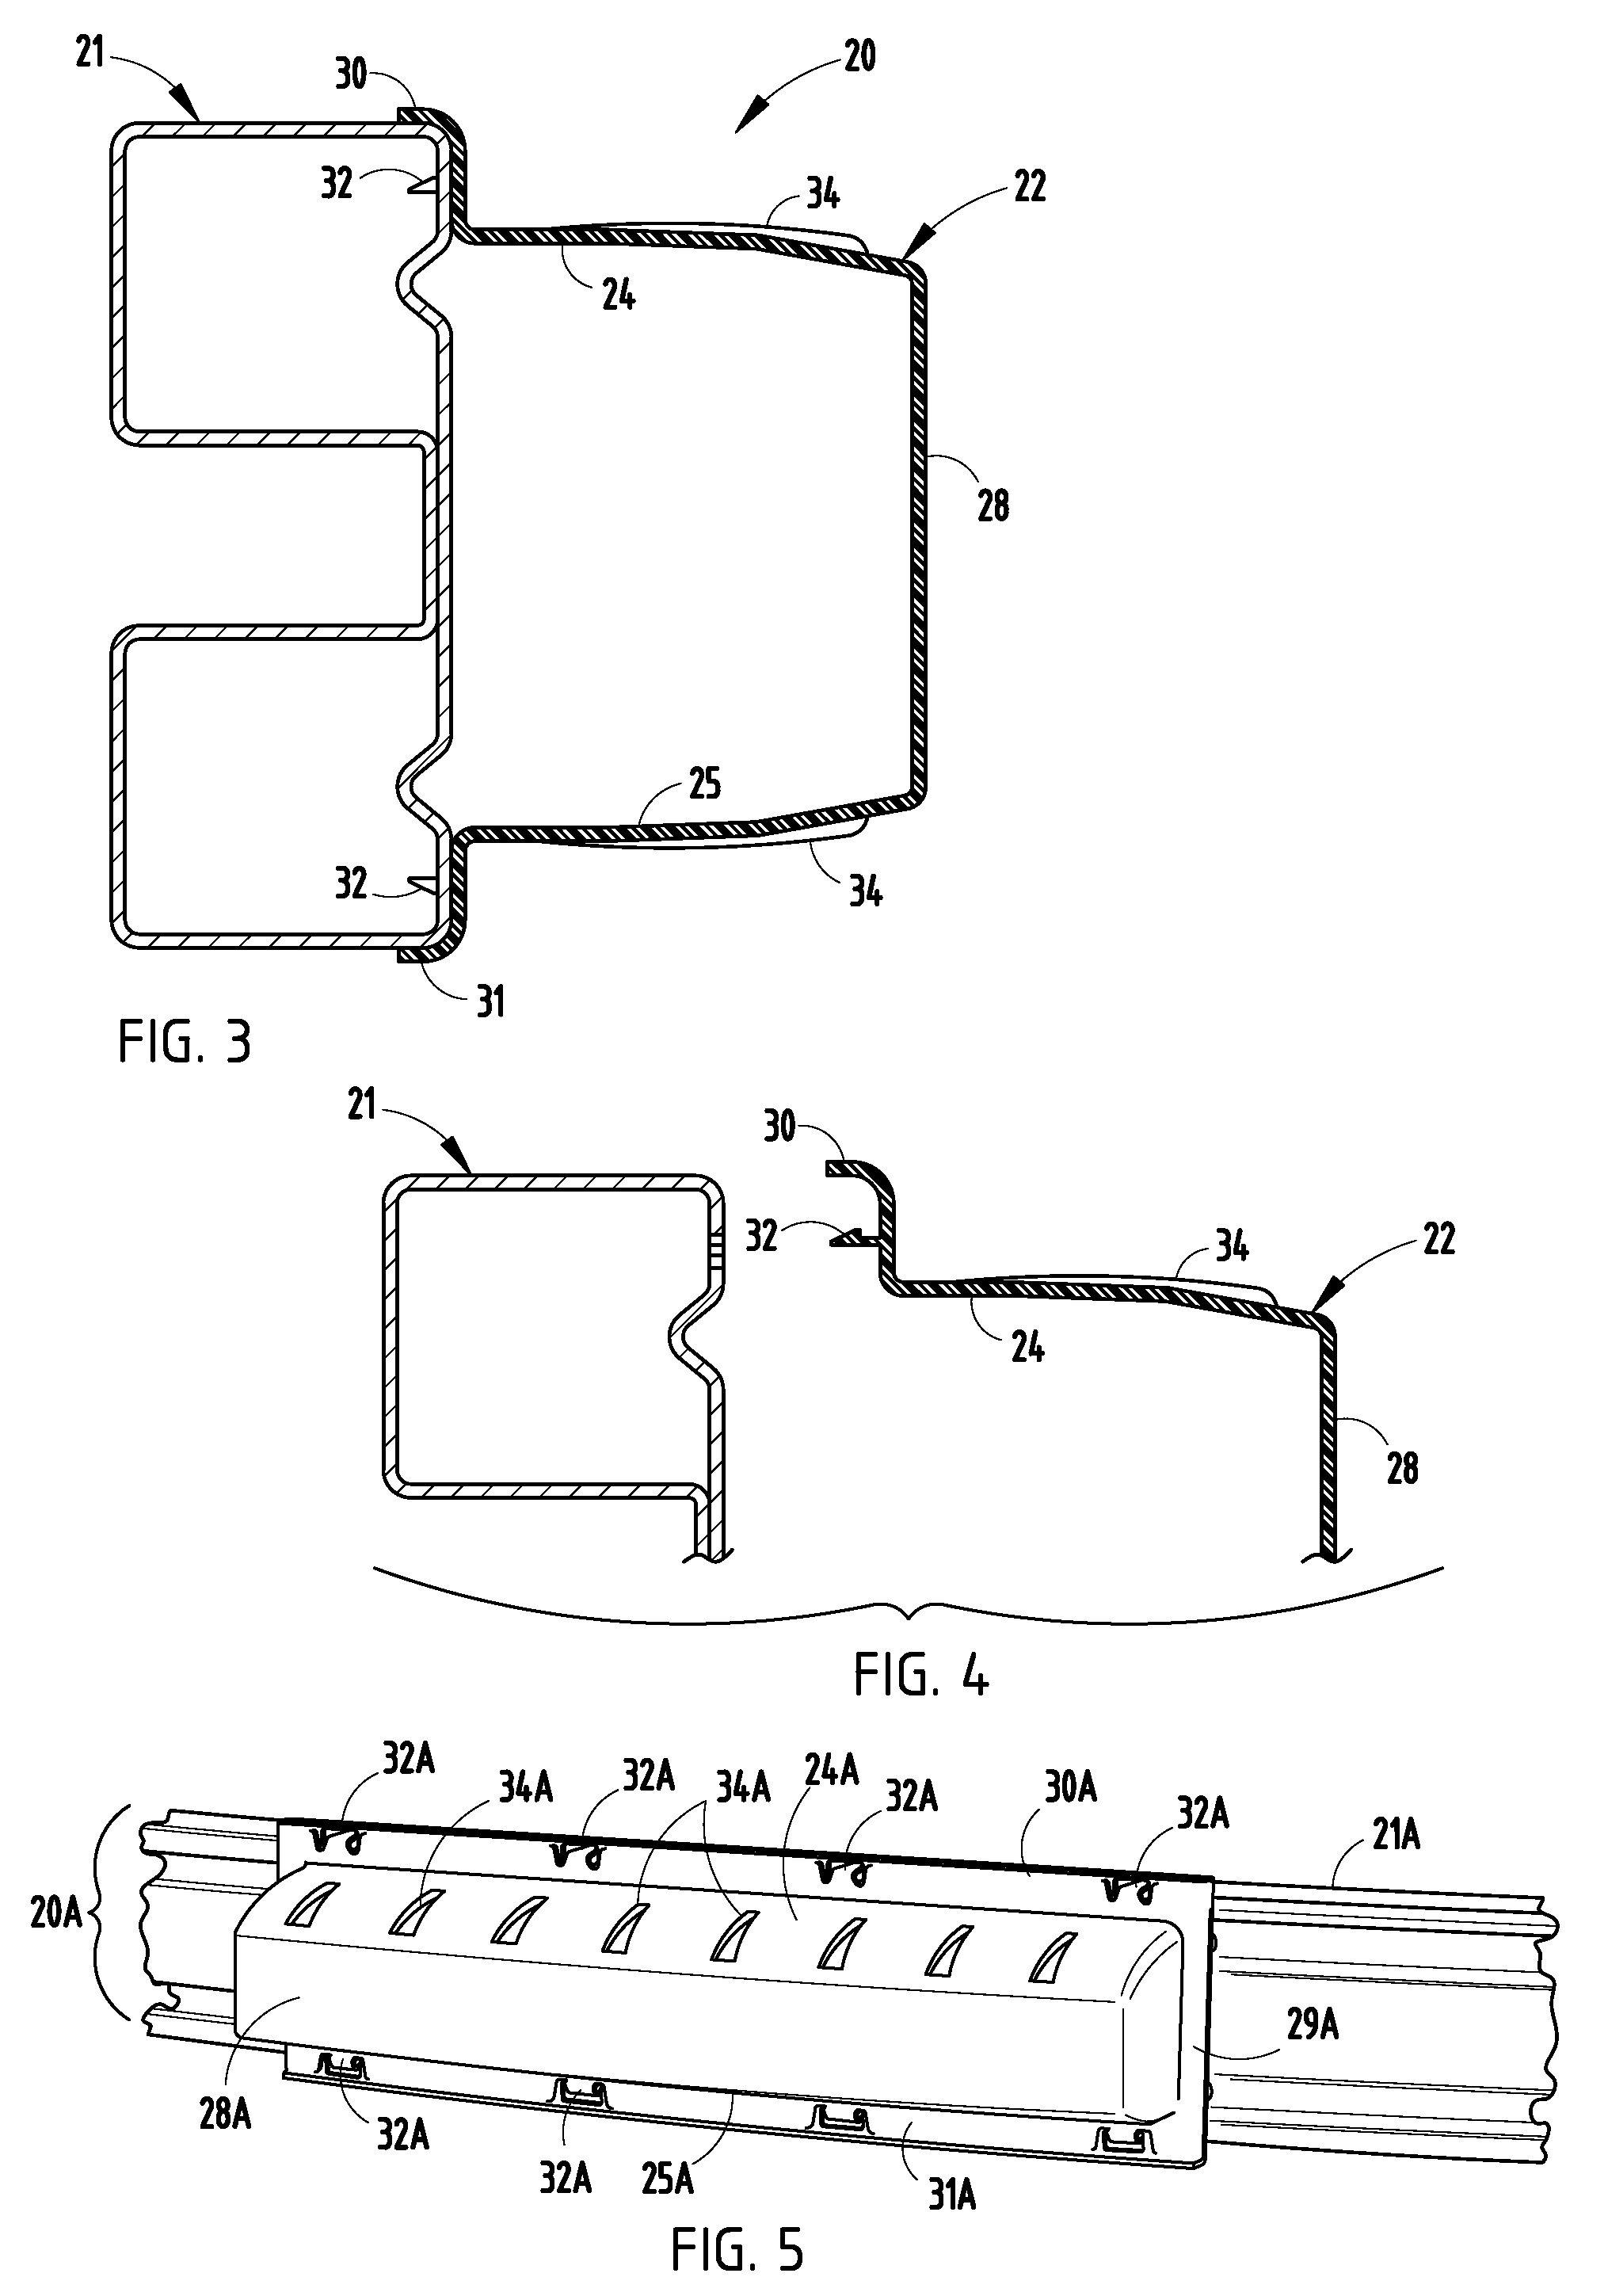 Energy absorber with sidewall stabilizer ribs